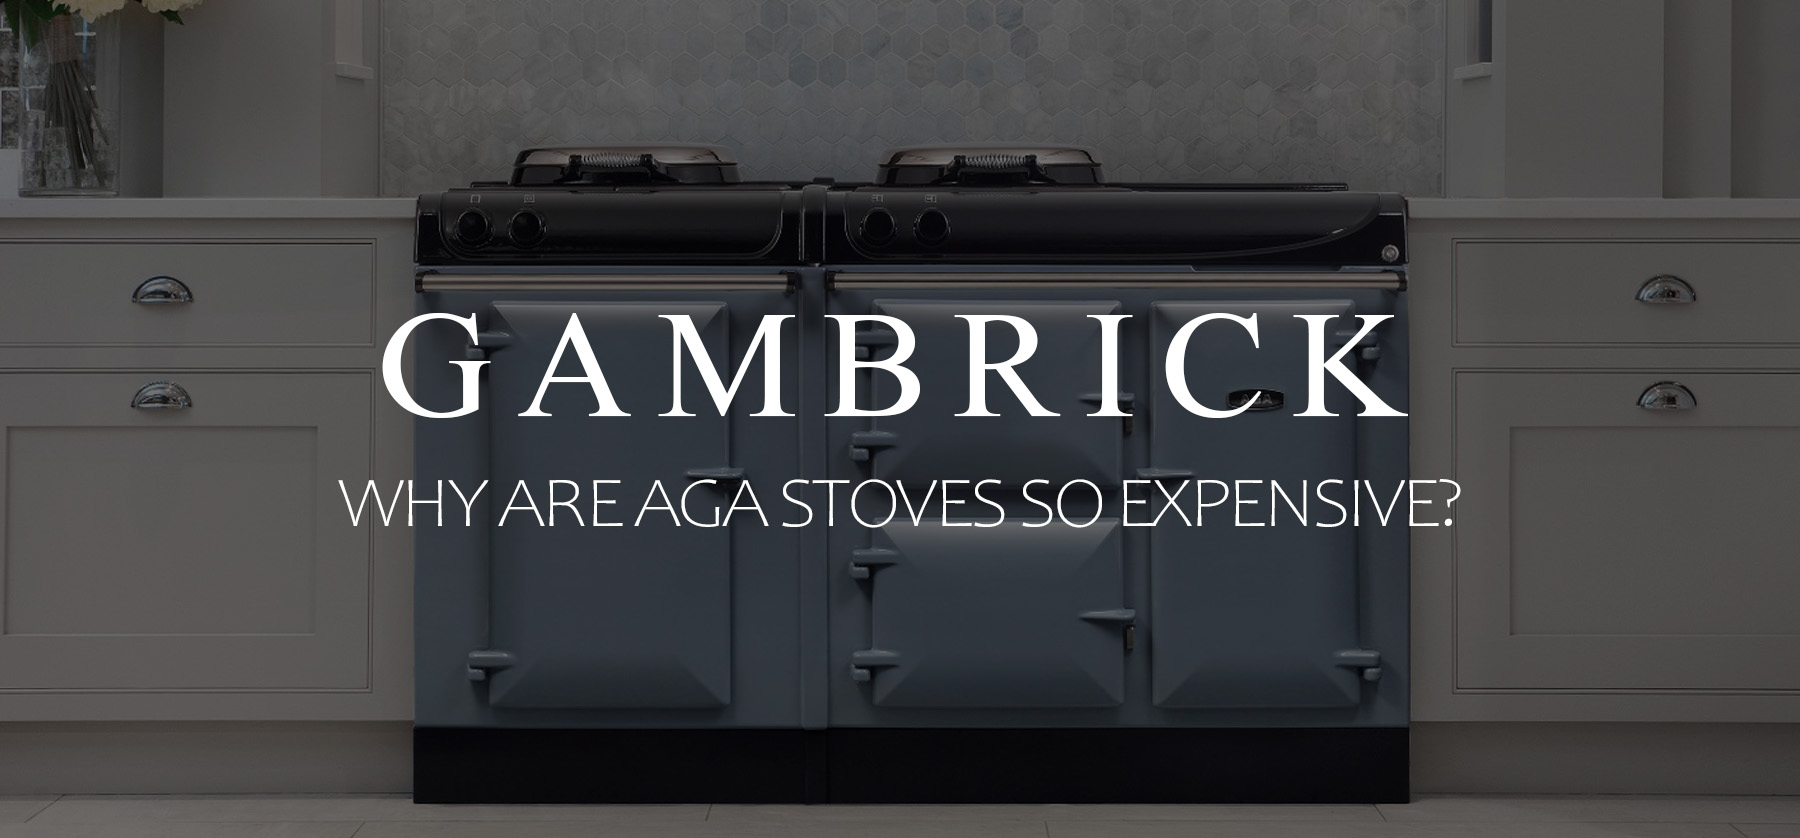 why are AGA stoves so expensive banner 1.1